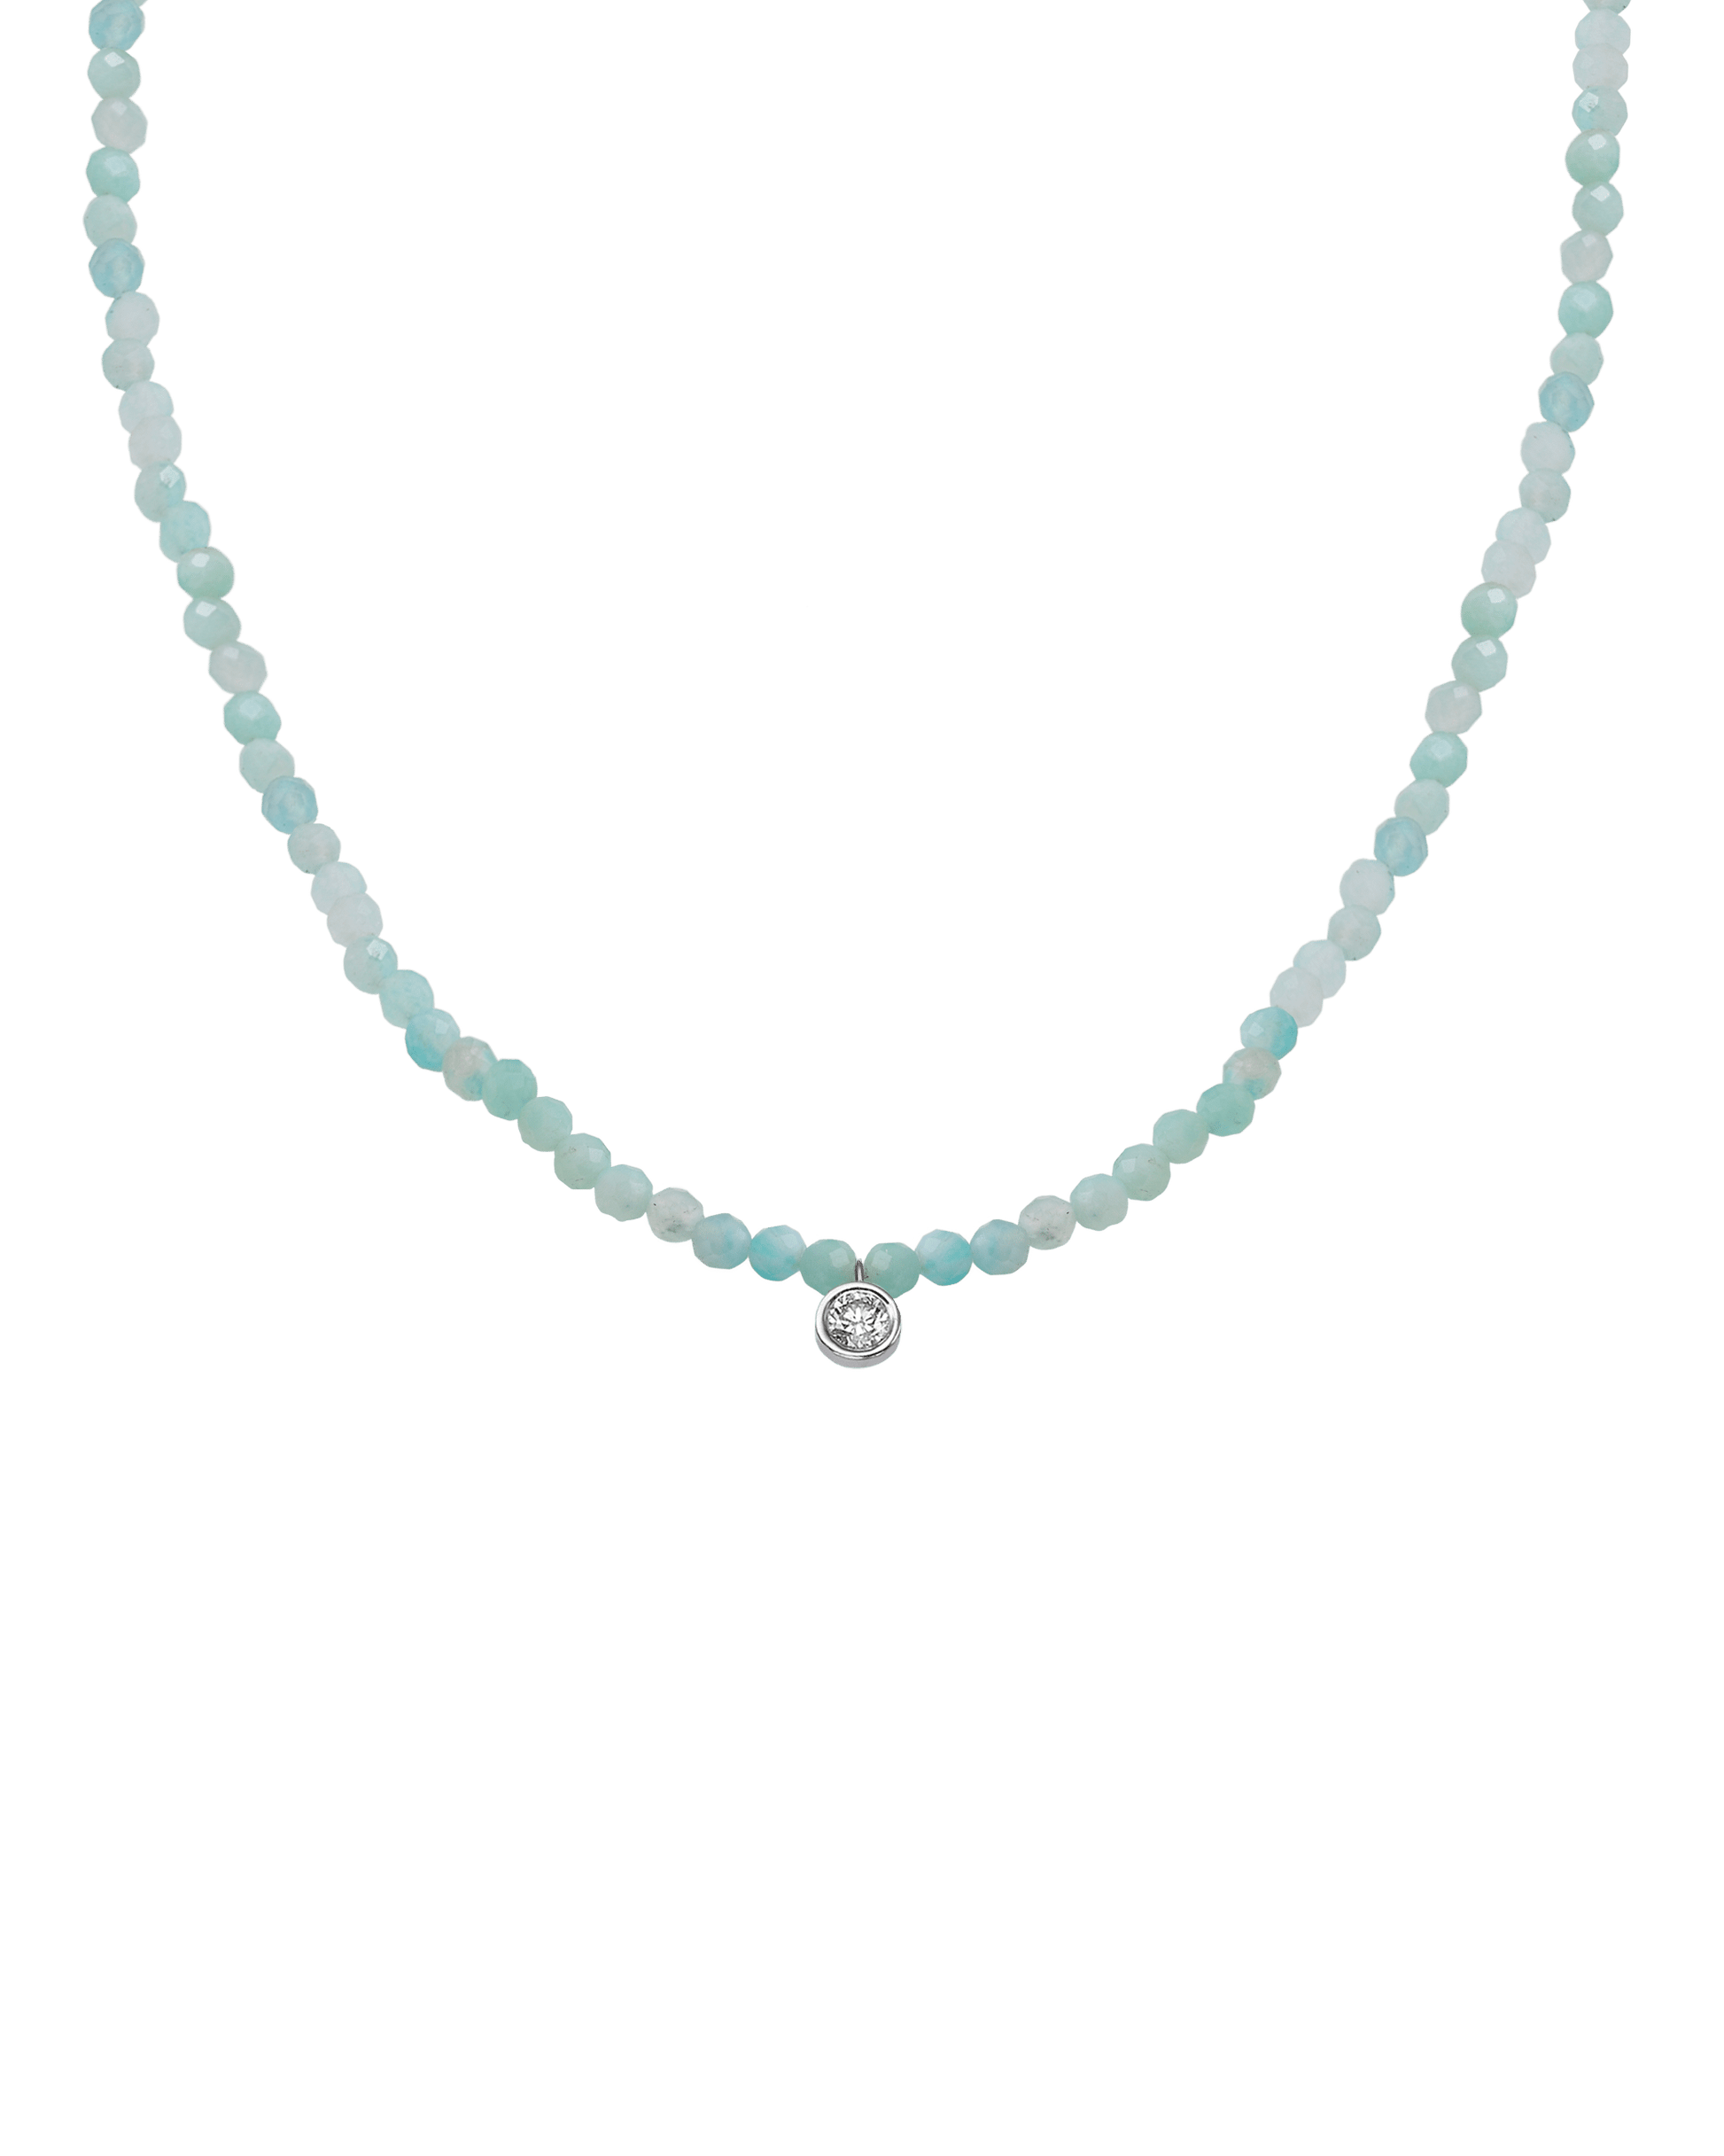 Apatite Gemstone & Diamond Necklace - 14K White Gold Necklaces 14K Solid Gold Natural Apatite Large: 0.10ct 14"